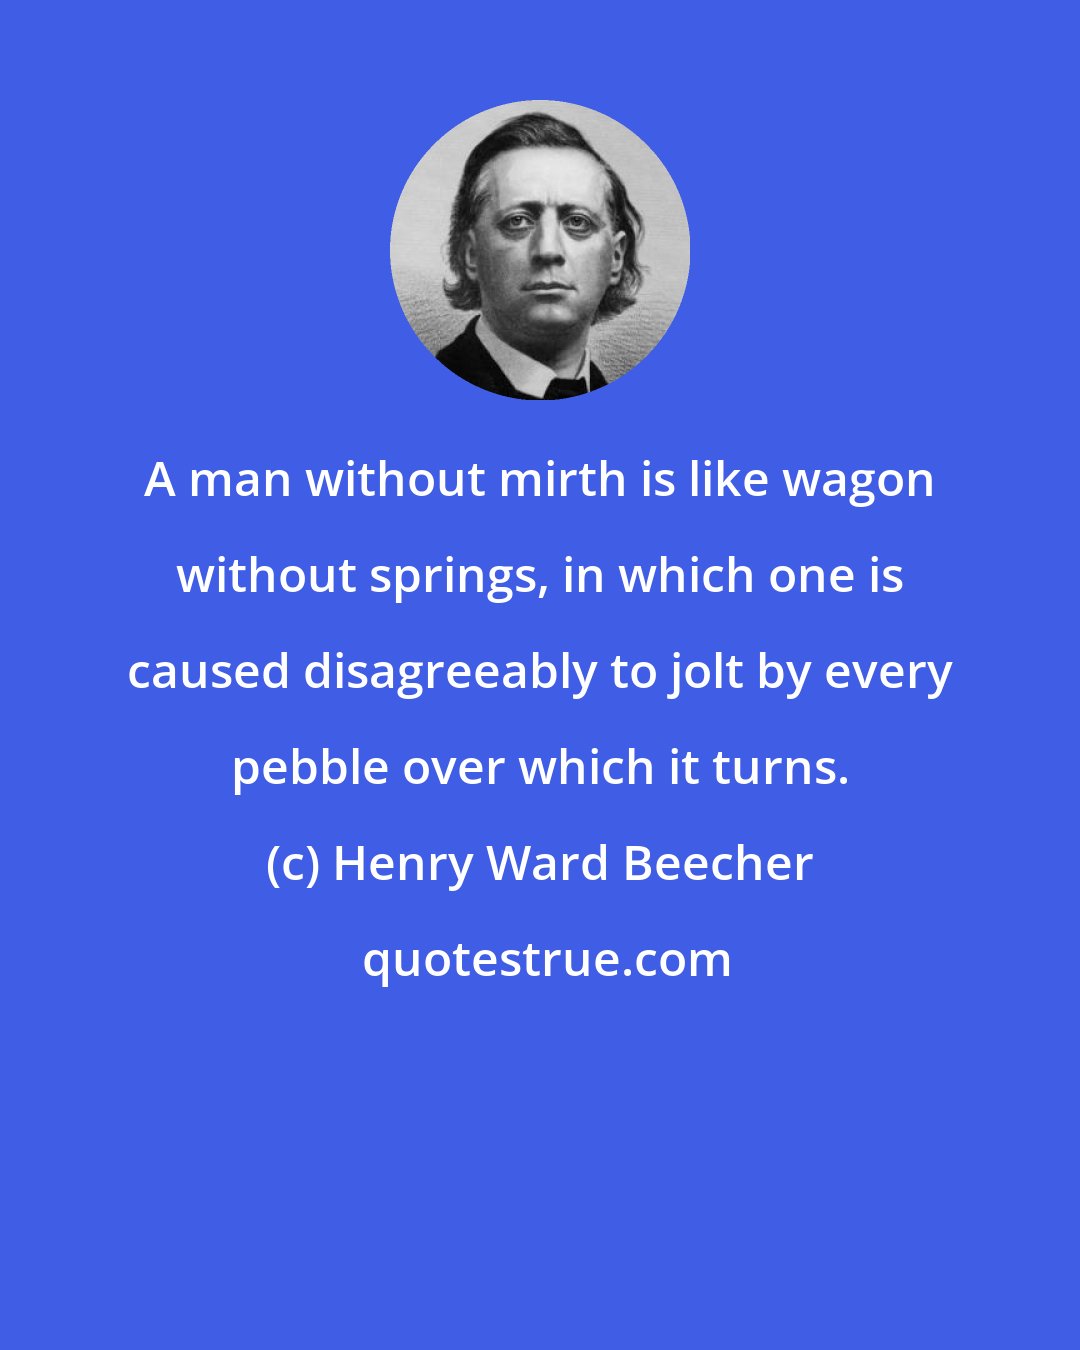 Henry Ward Beecher: A man without mirth is like wagon without springs, in which one is caused disagreeably to jolt by every pebble over which it turns.